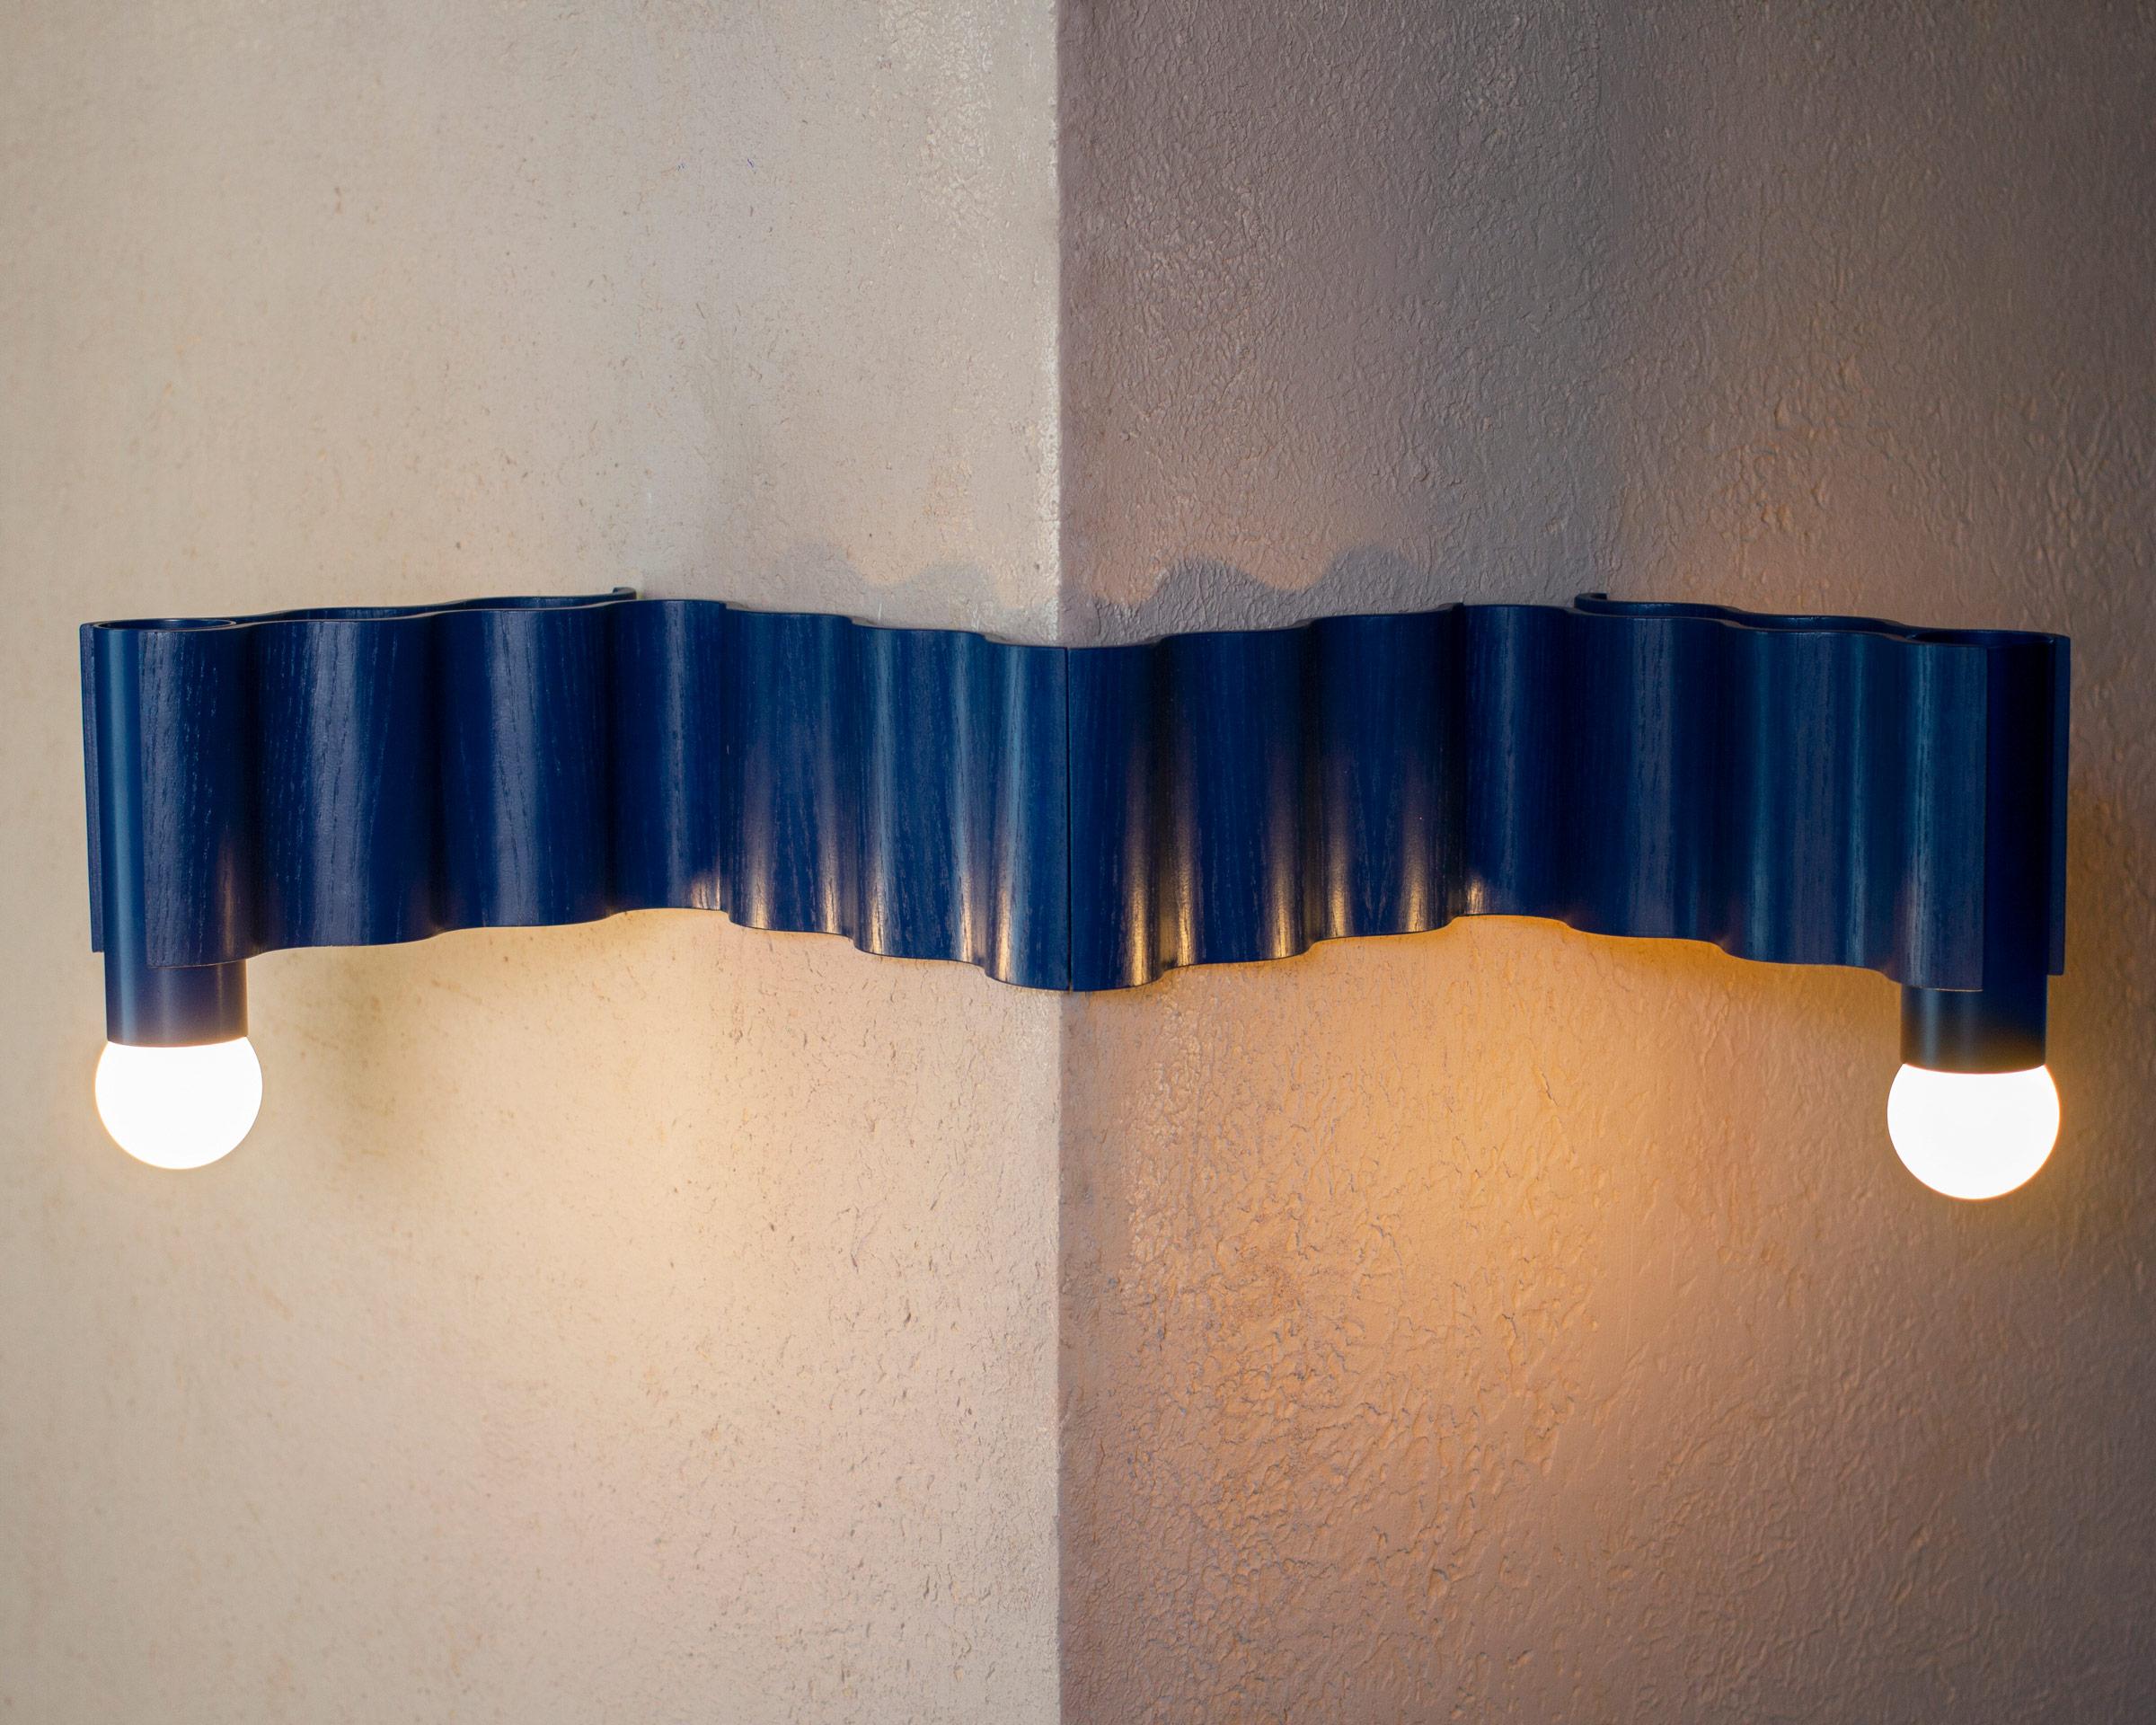 Short Single Corrugation Sconce / Wall Light in Sapphire Blue For Sale 8